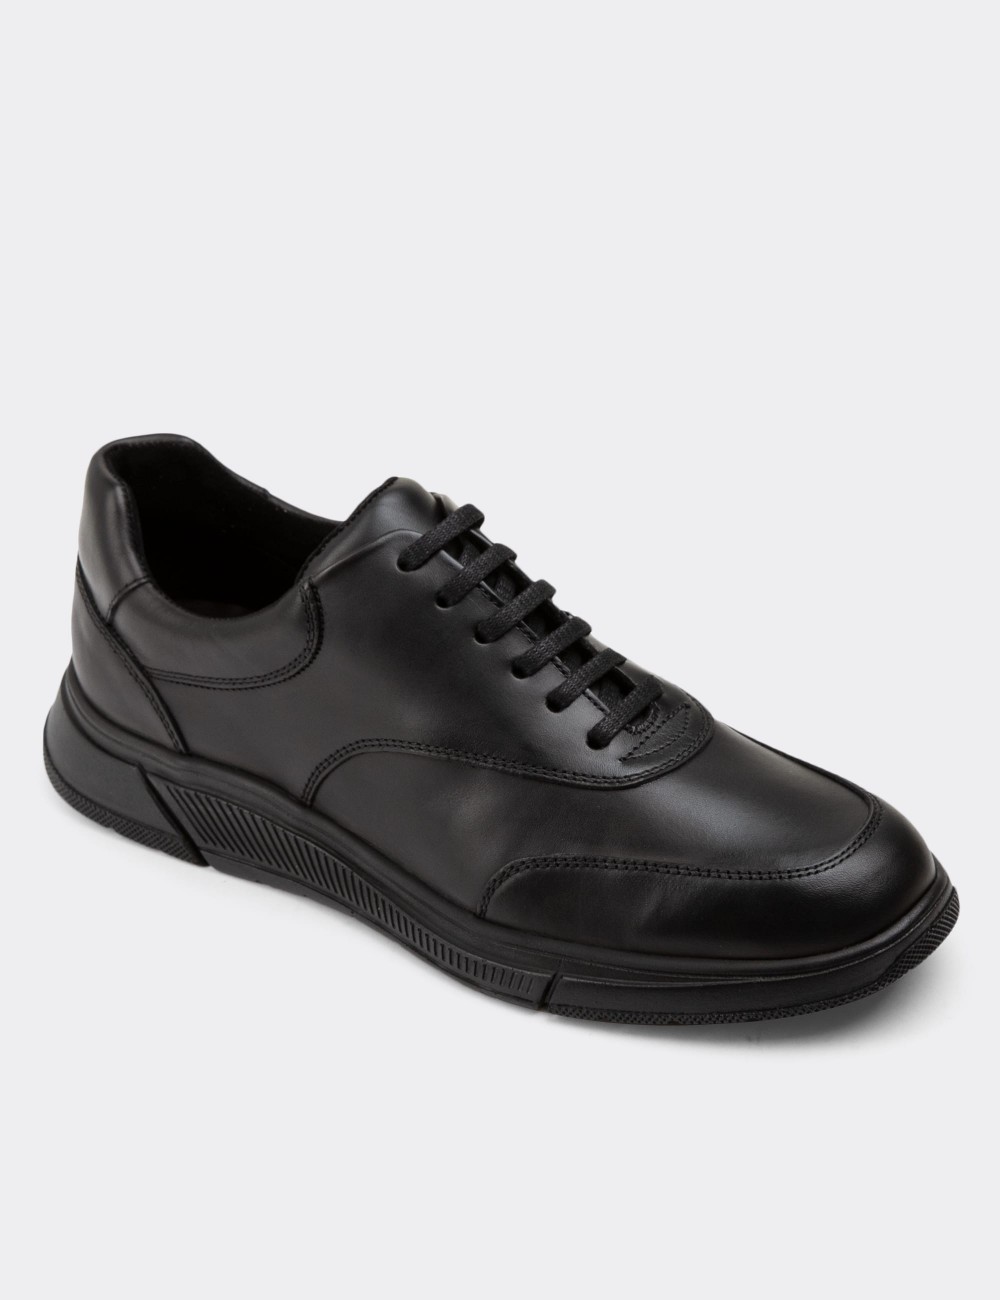 Black Leather Lace-up Shoes - 01871MSYHC01